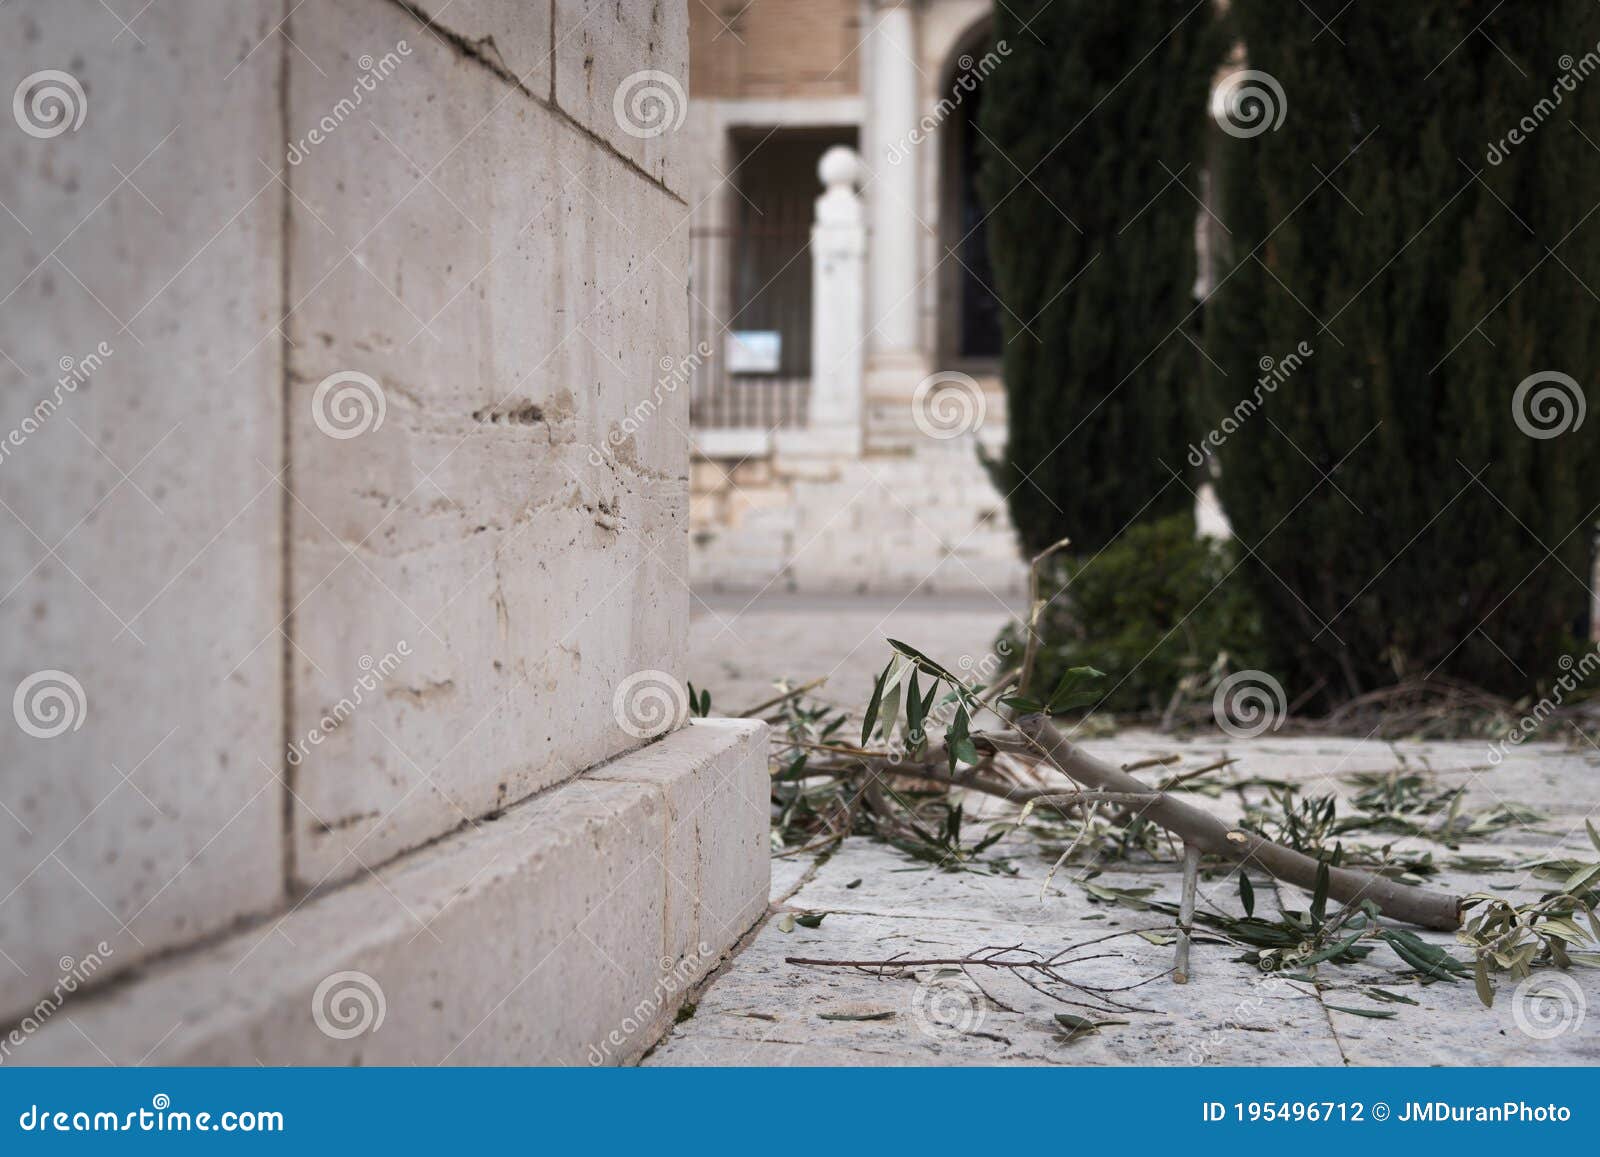 olive branch on the ground during the religious celebration of holy week in colmenar de oreja, spain